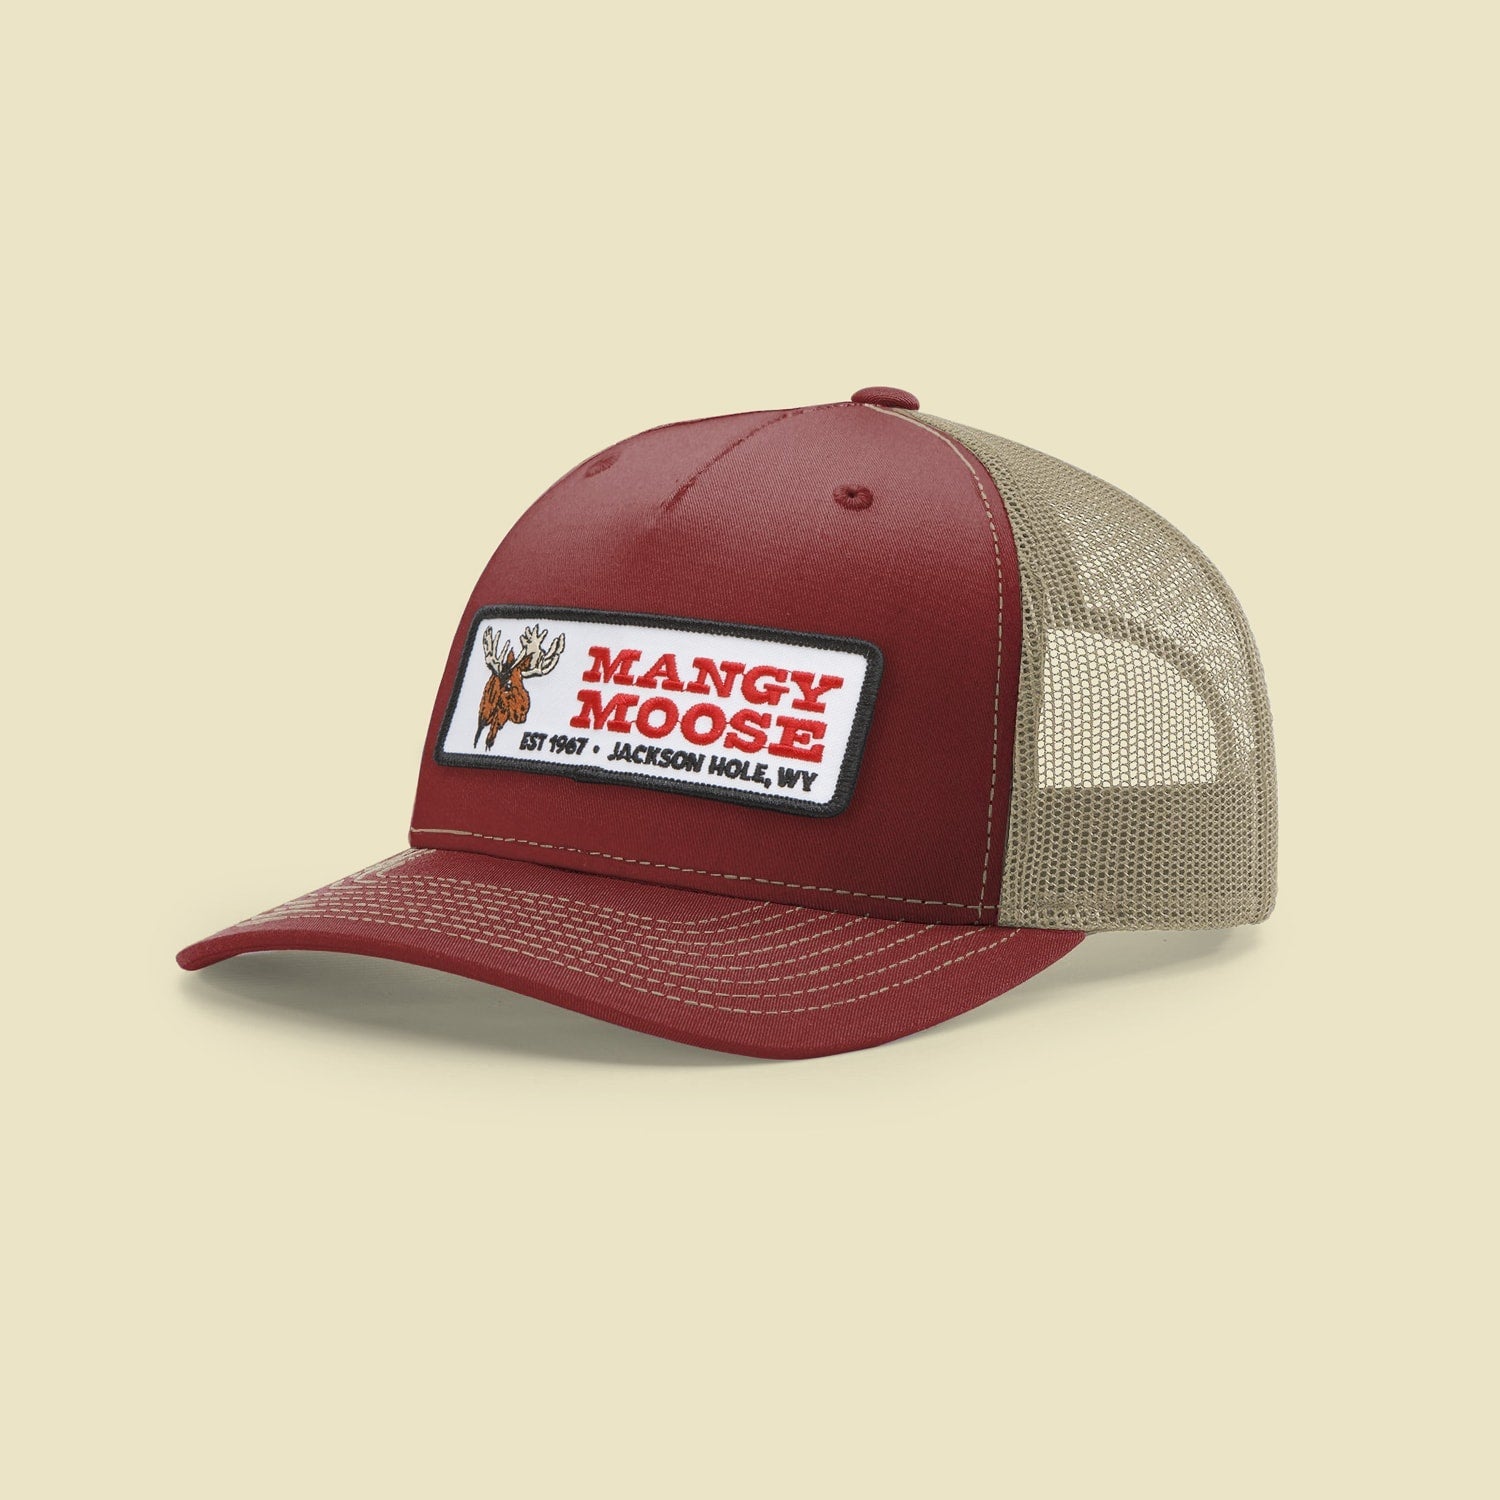 Manny Five Panel Trucker Hat - The Mangy Moose